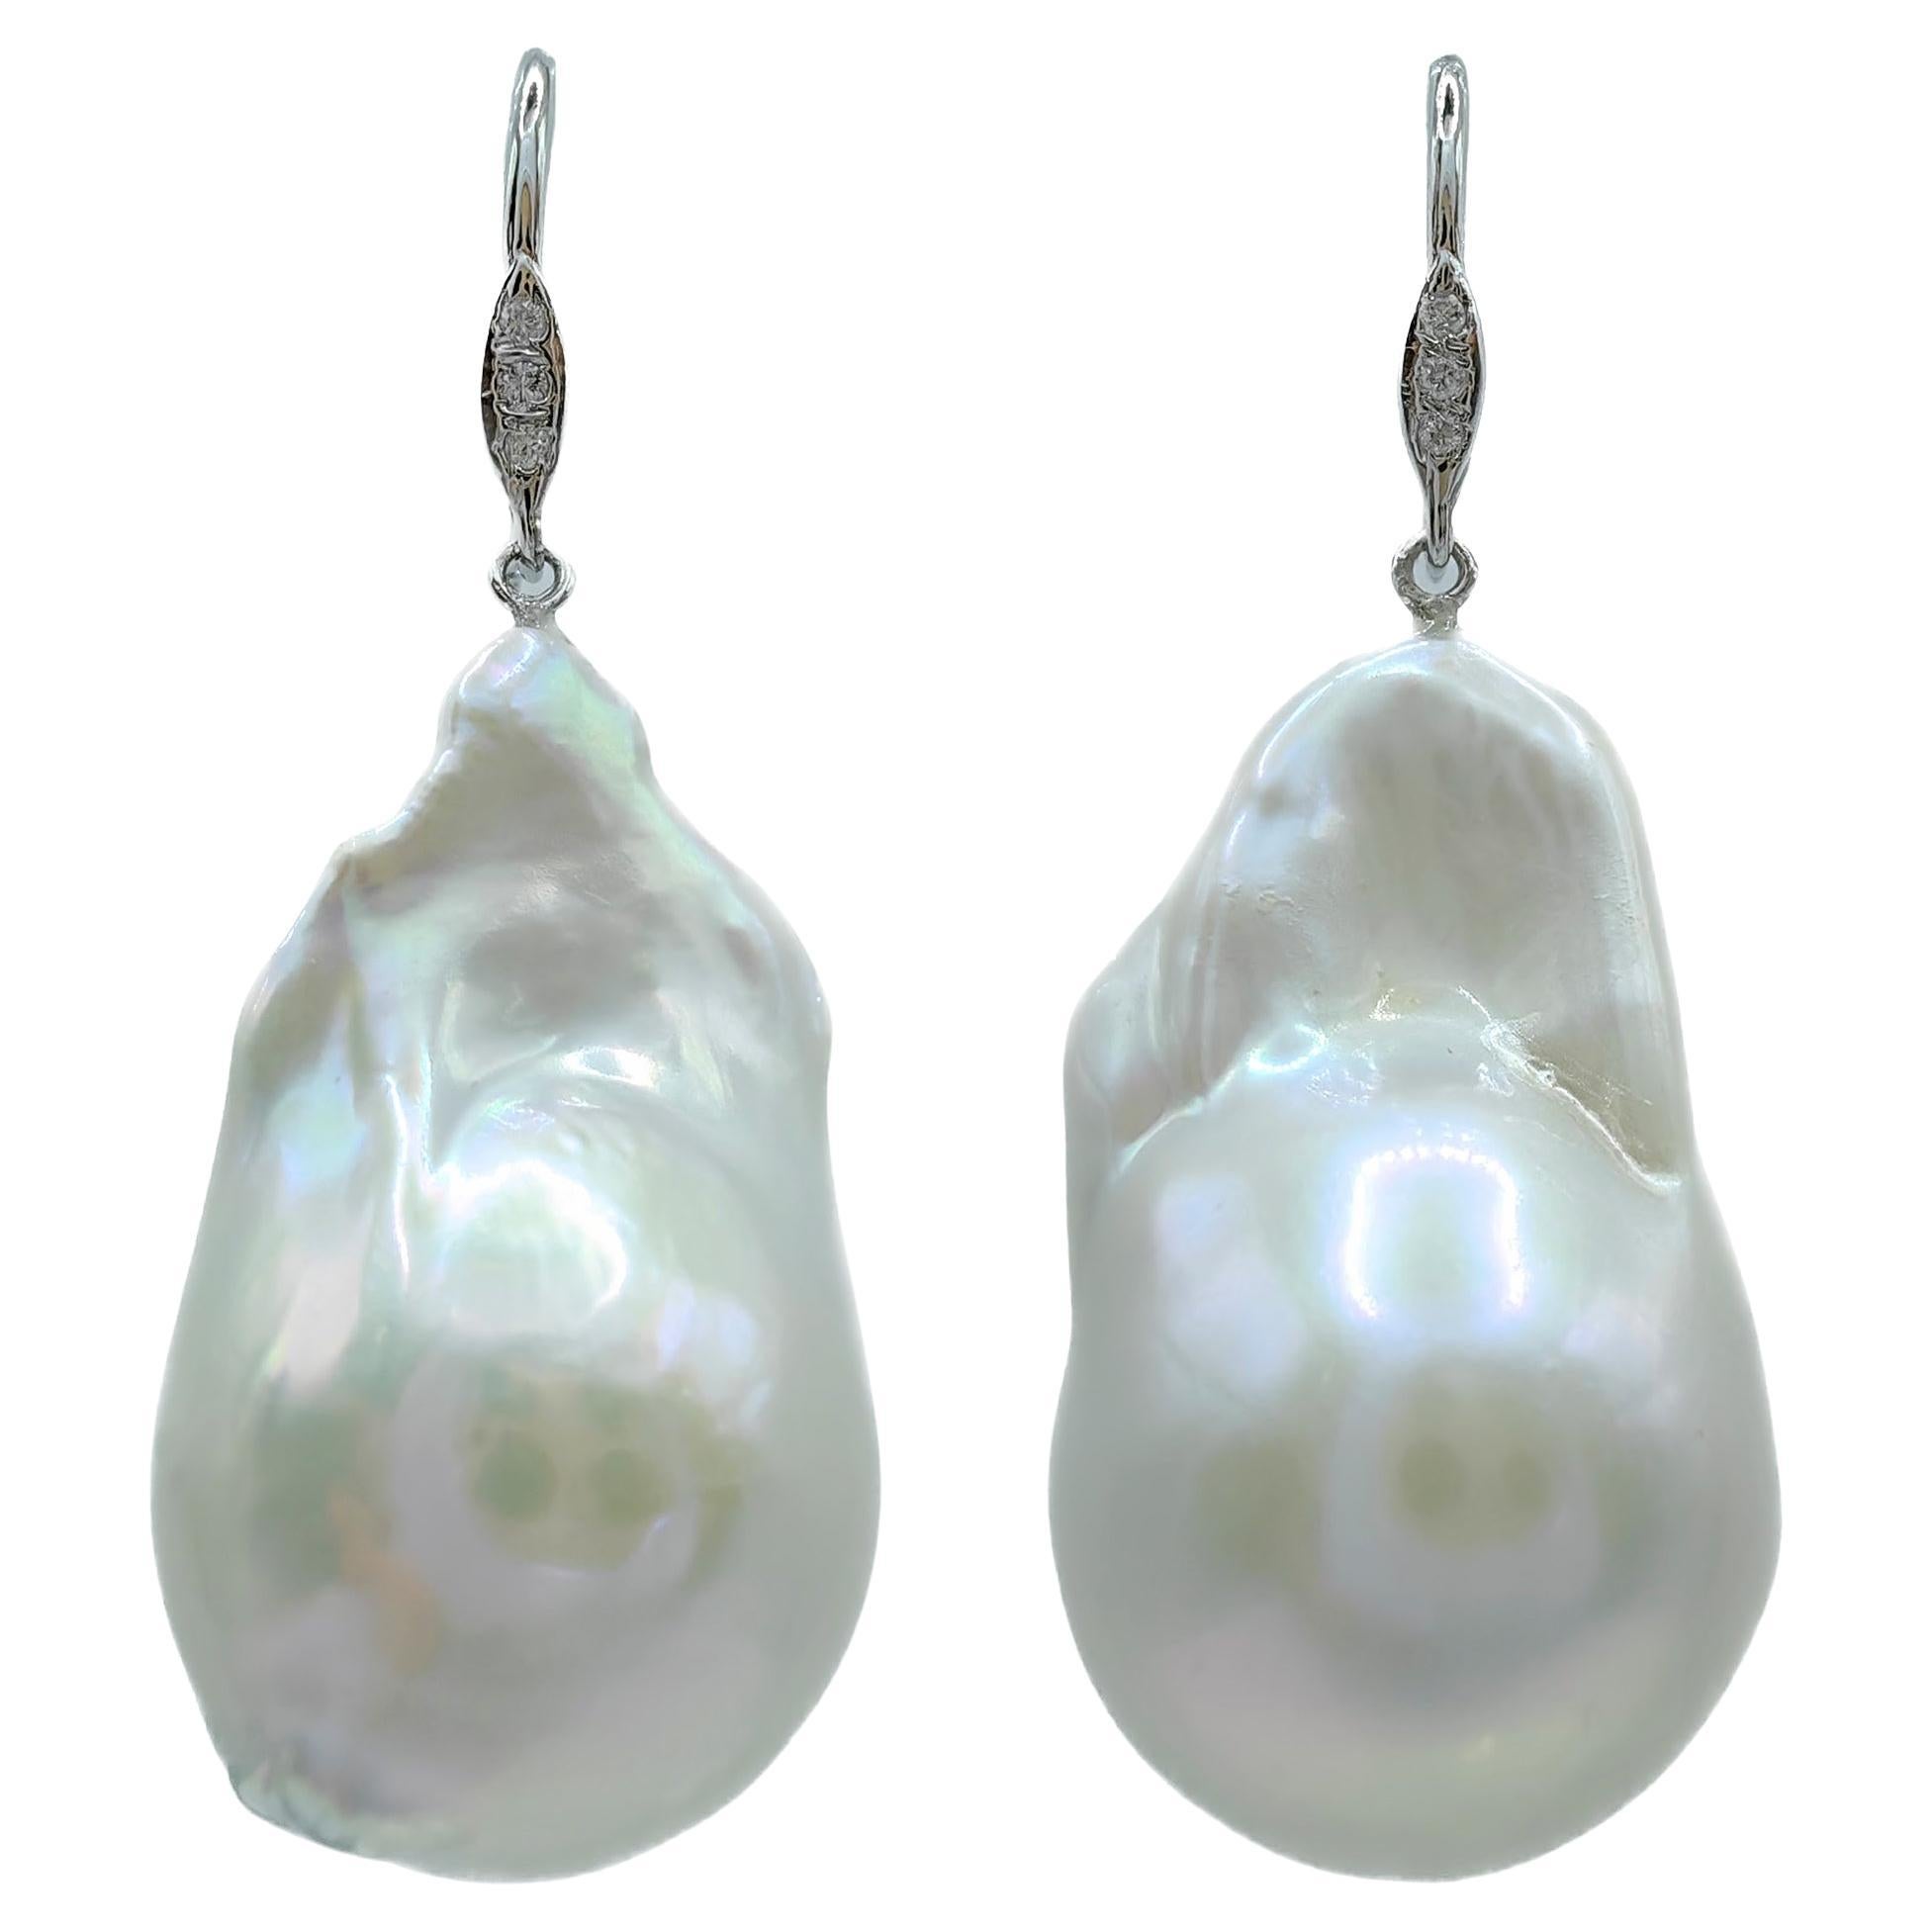 Baroque Pearl Diamond Dangling Drop Earrings With 18K White Gold French Hooks